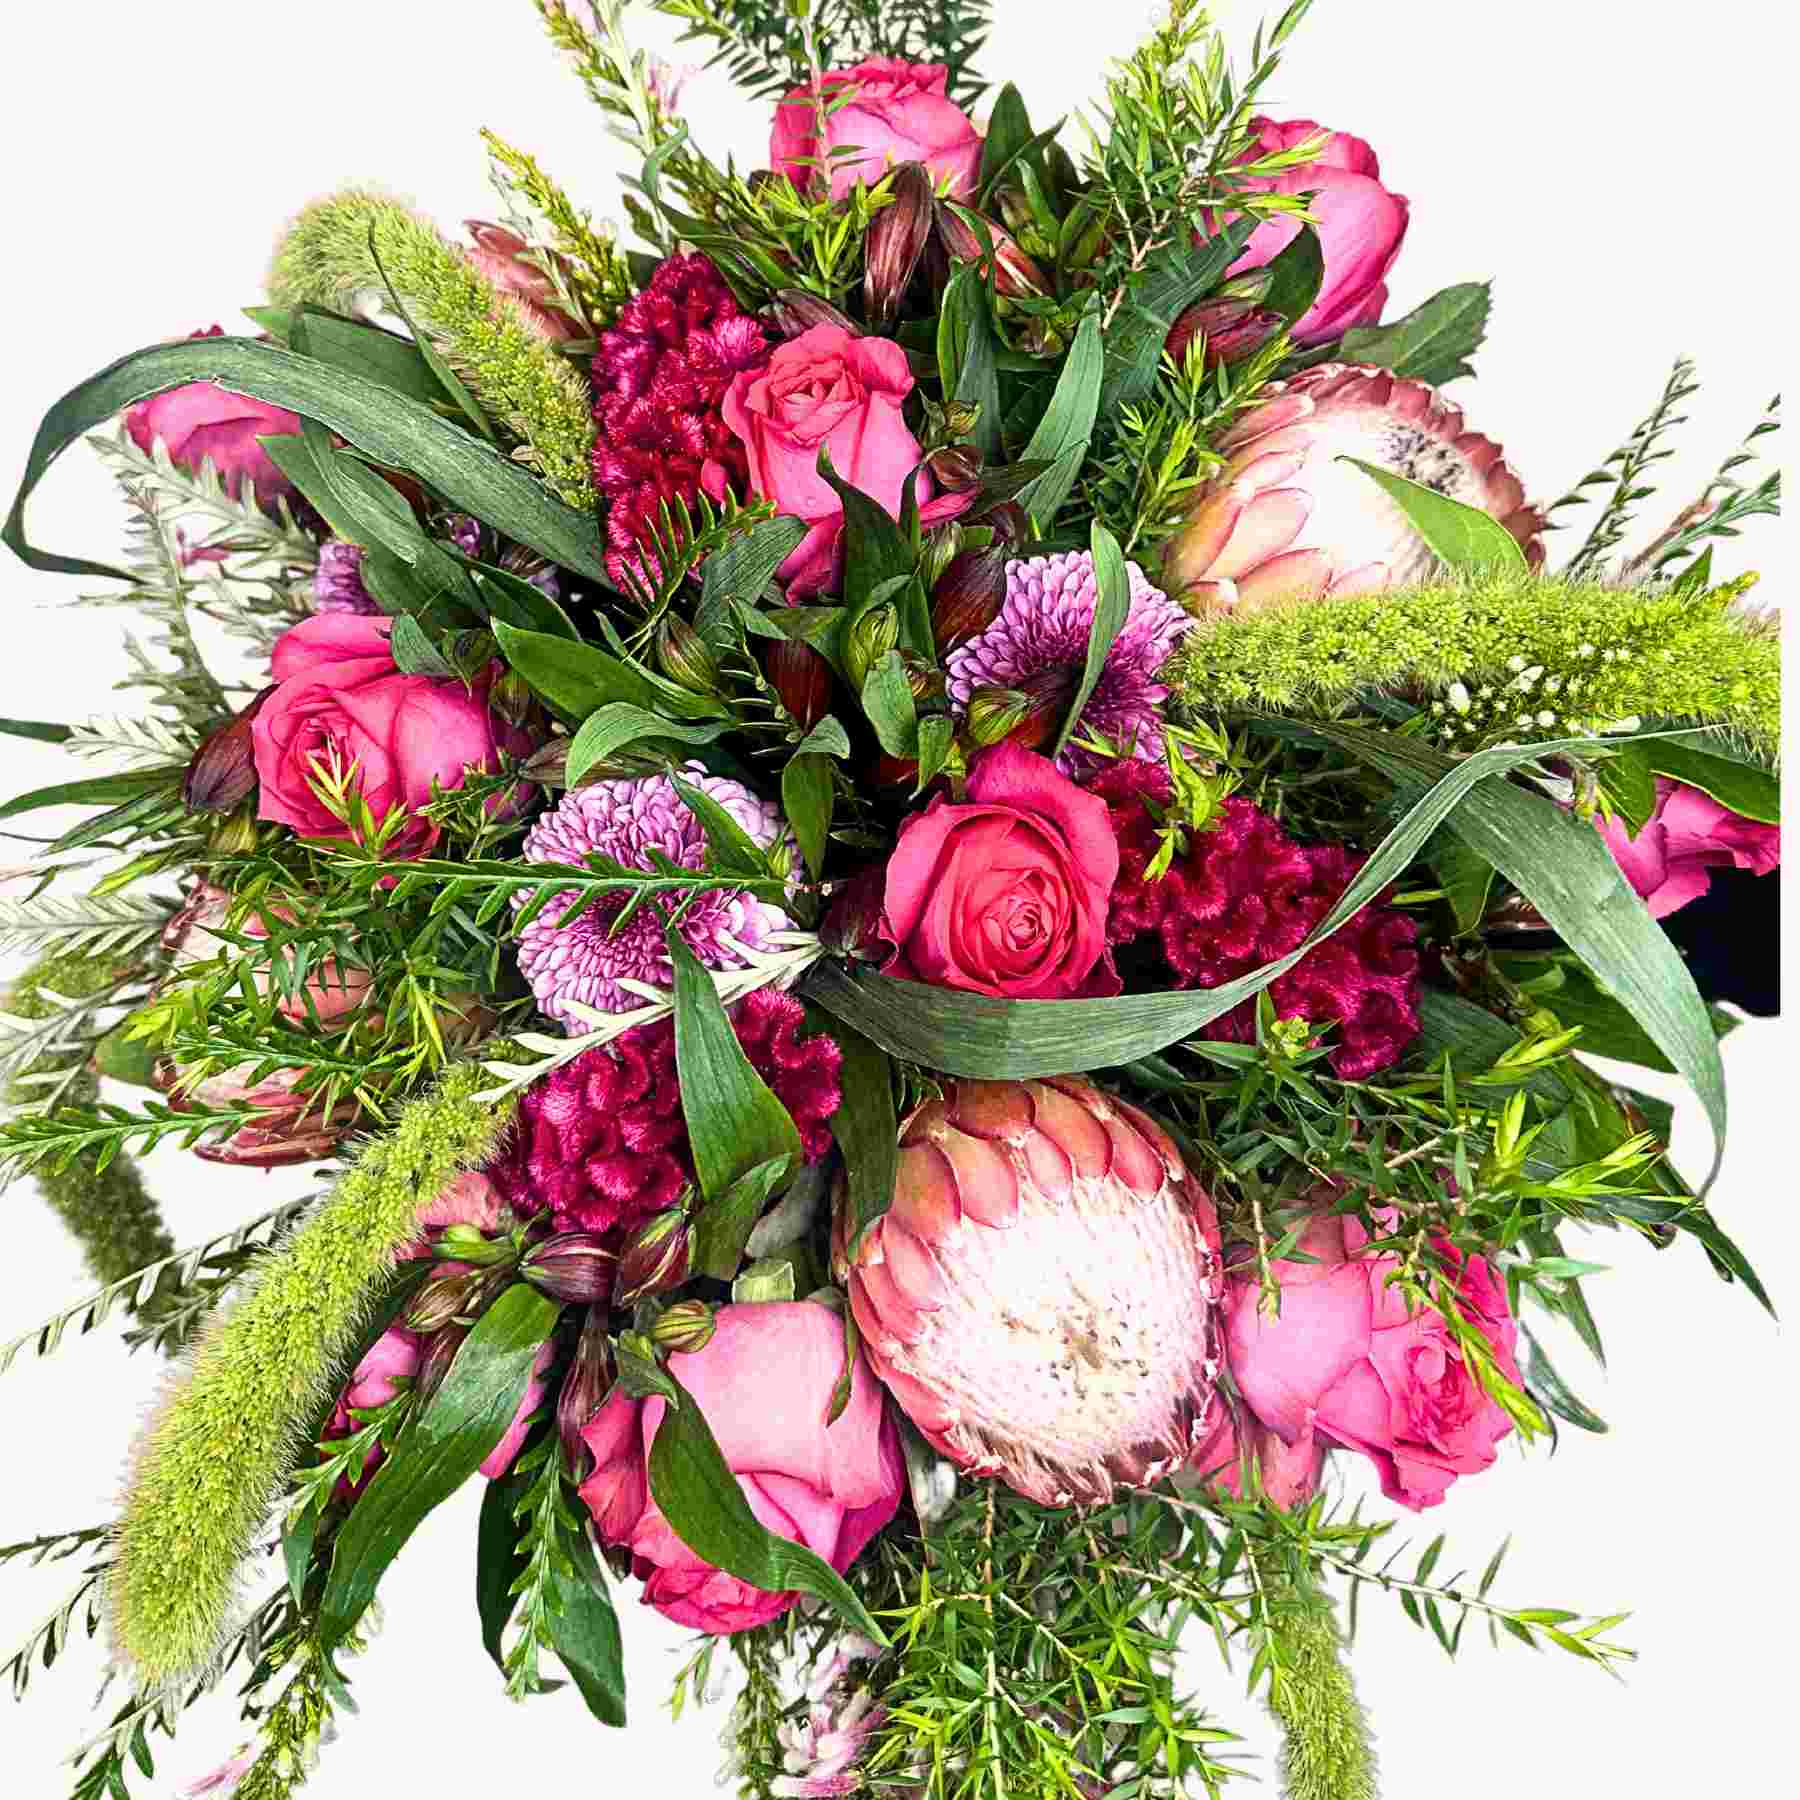 Close-up of Lily's Flower Bouquet featuring an exquisite mix of pink roses, proteas, and lush greenery, a perfect gift from Fabulous Flowers and Gifts.